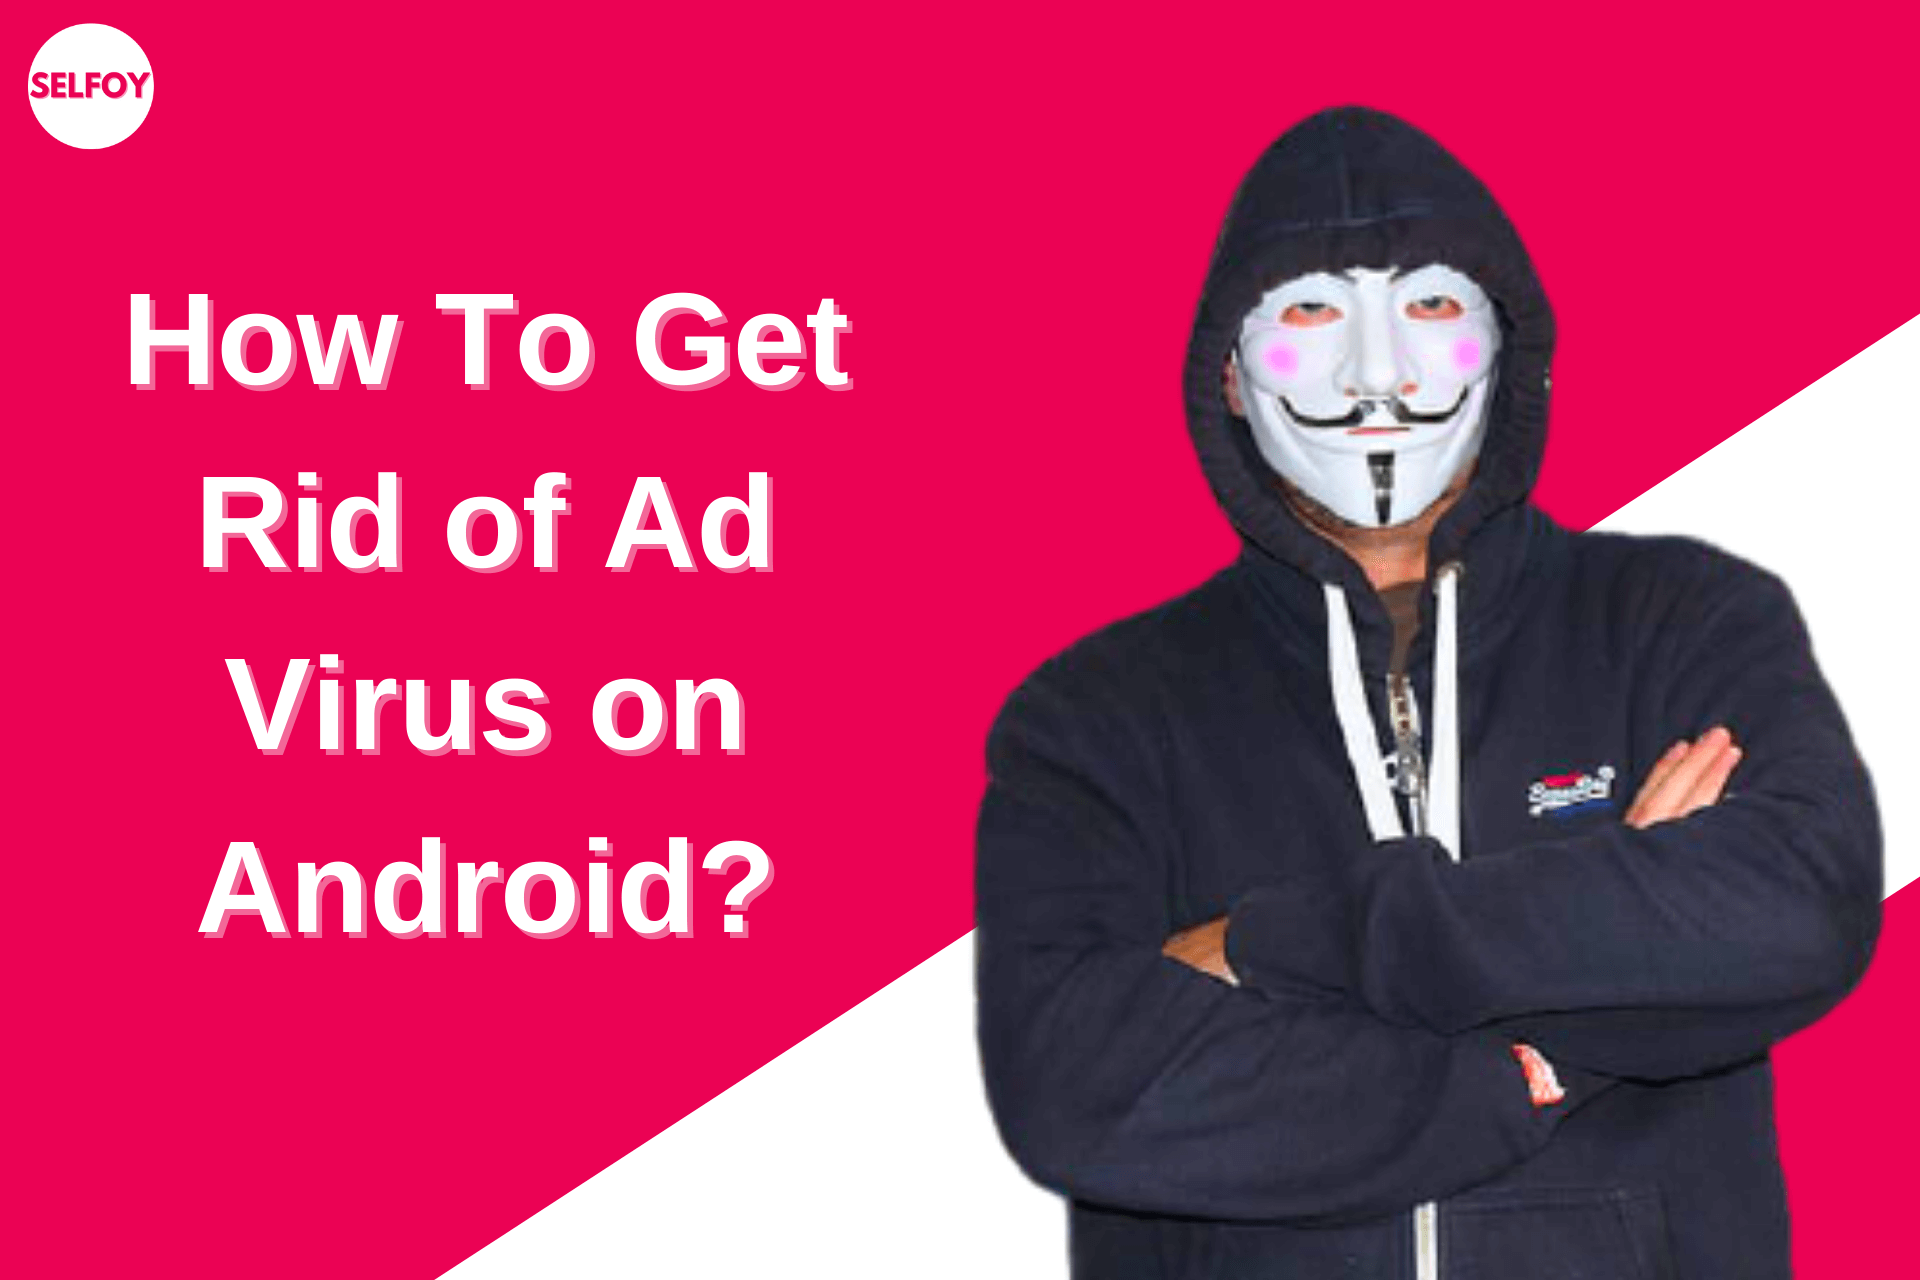 How To Get Rid of Ad Virus on Android